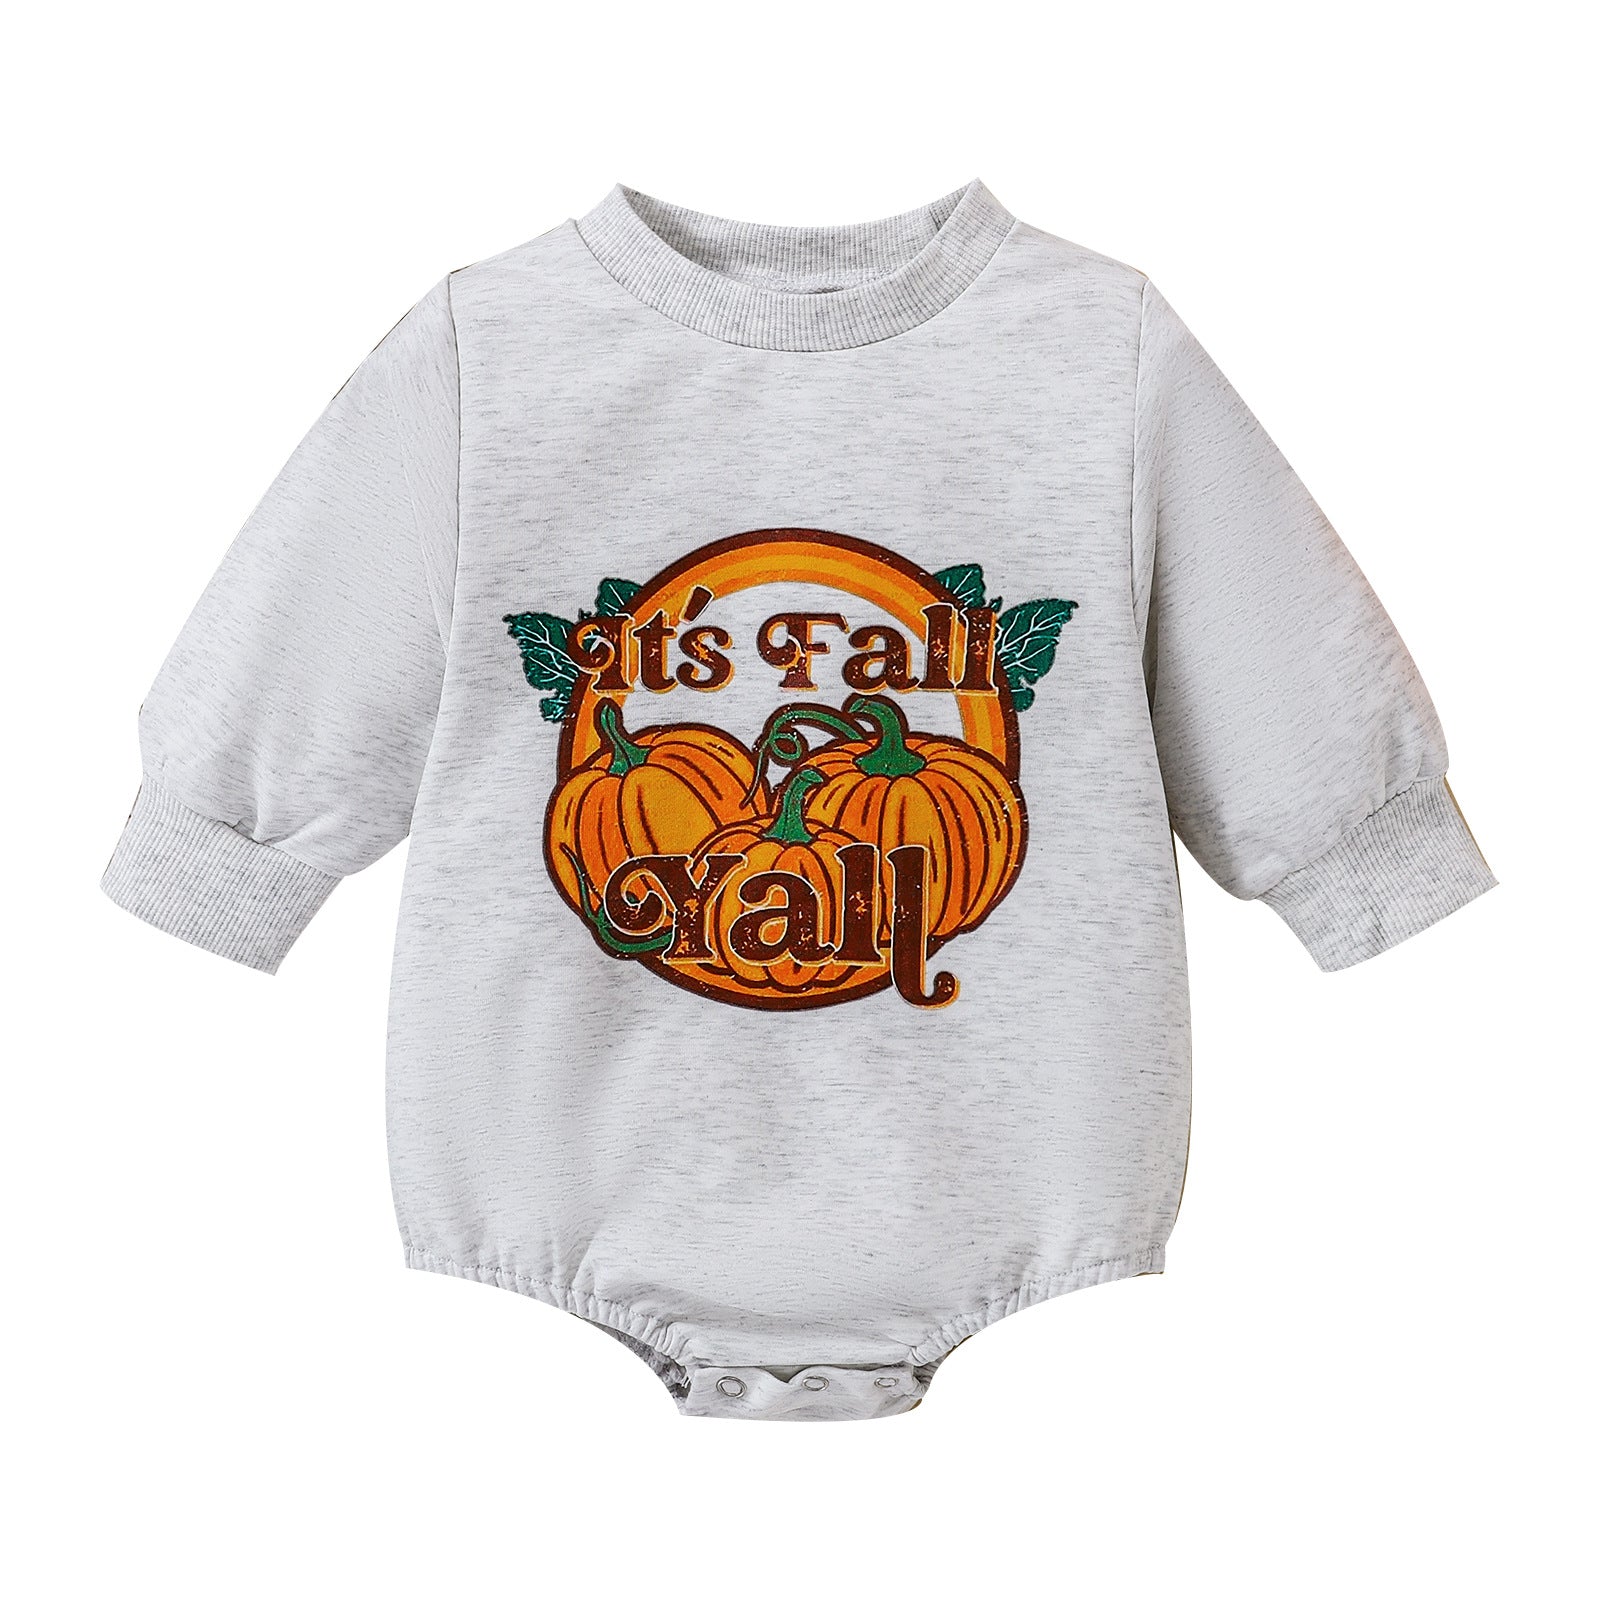 Celebrate Halloween with Style and Personality - New Halloween Romper with Cute Personality